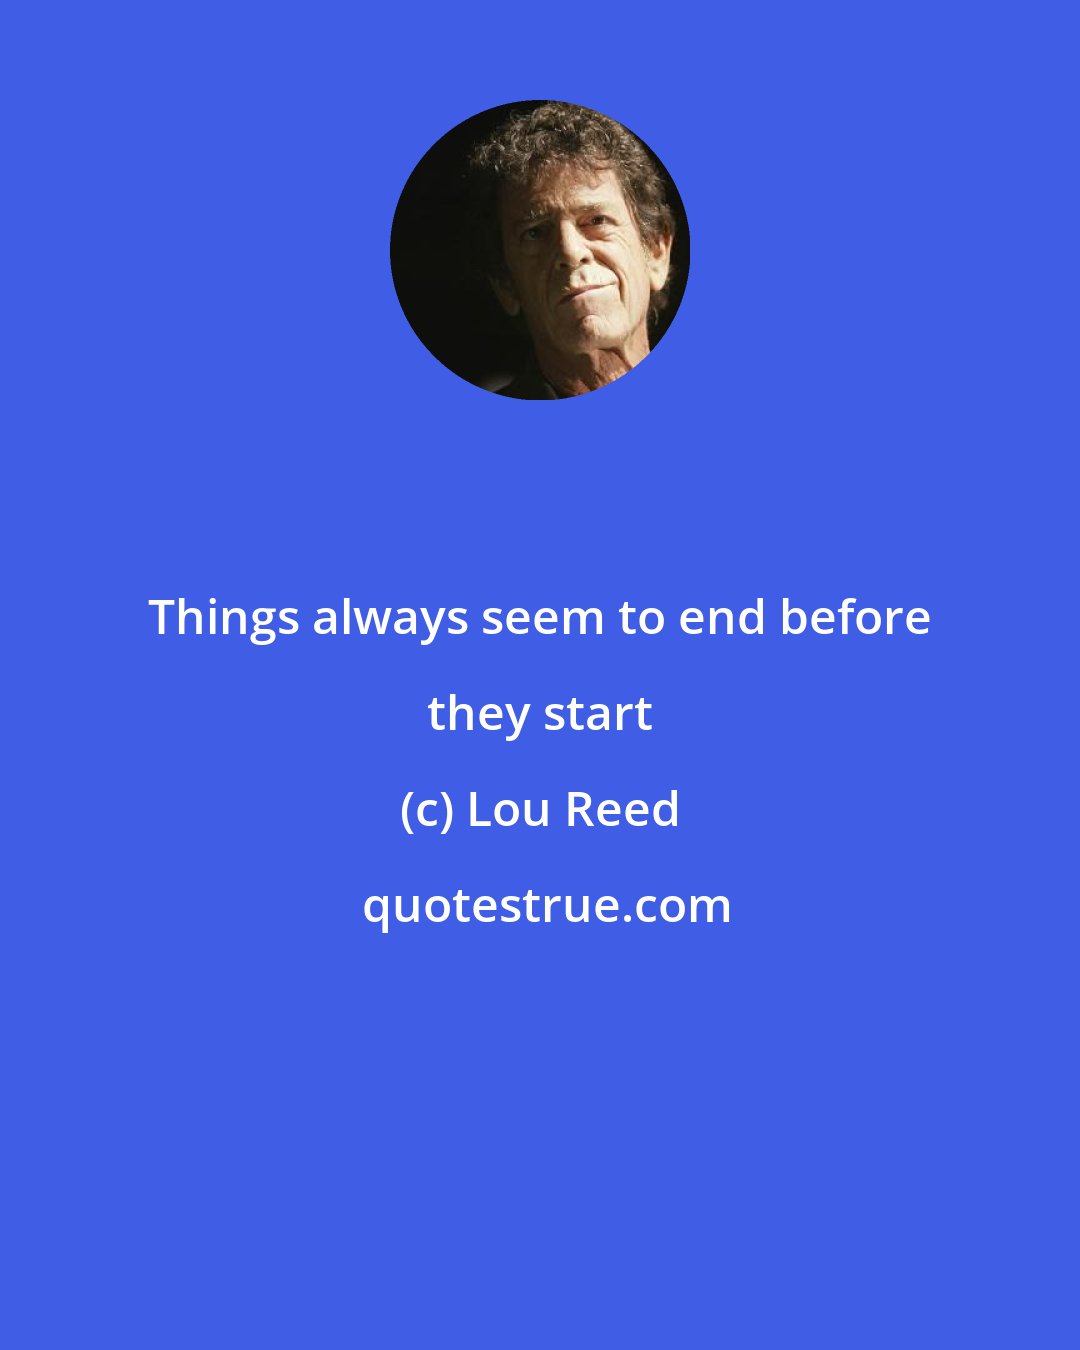 Lou Reed: Things always seem to end before they start